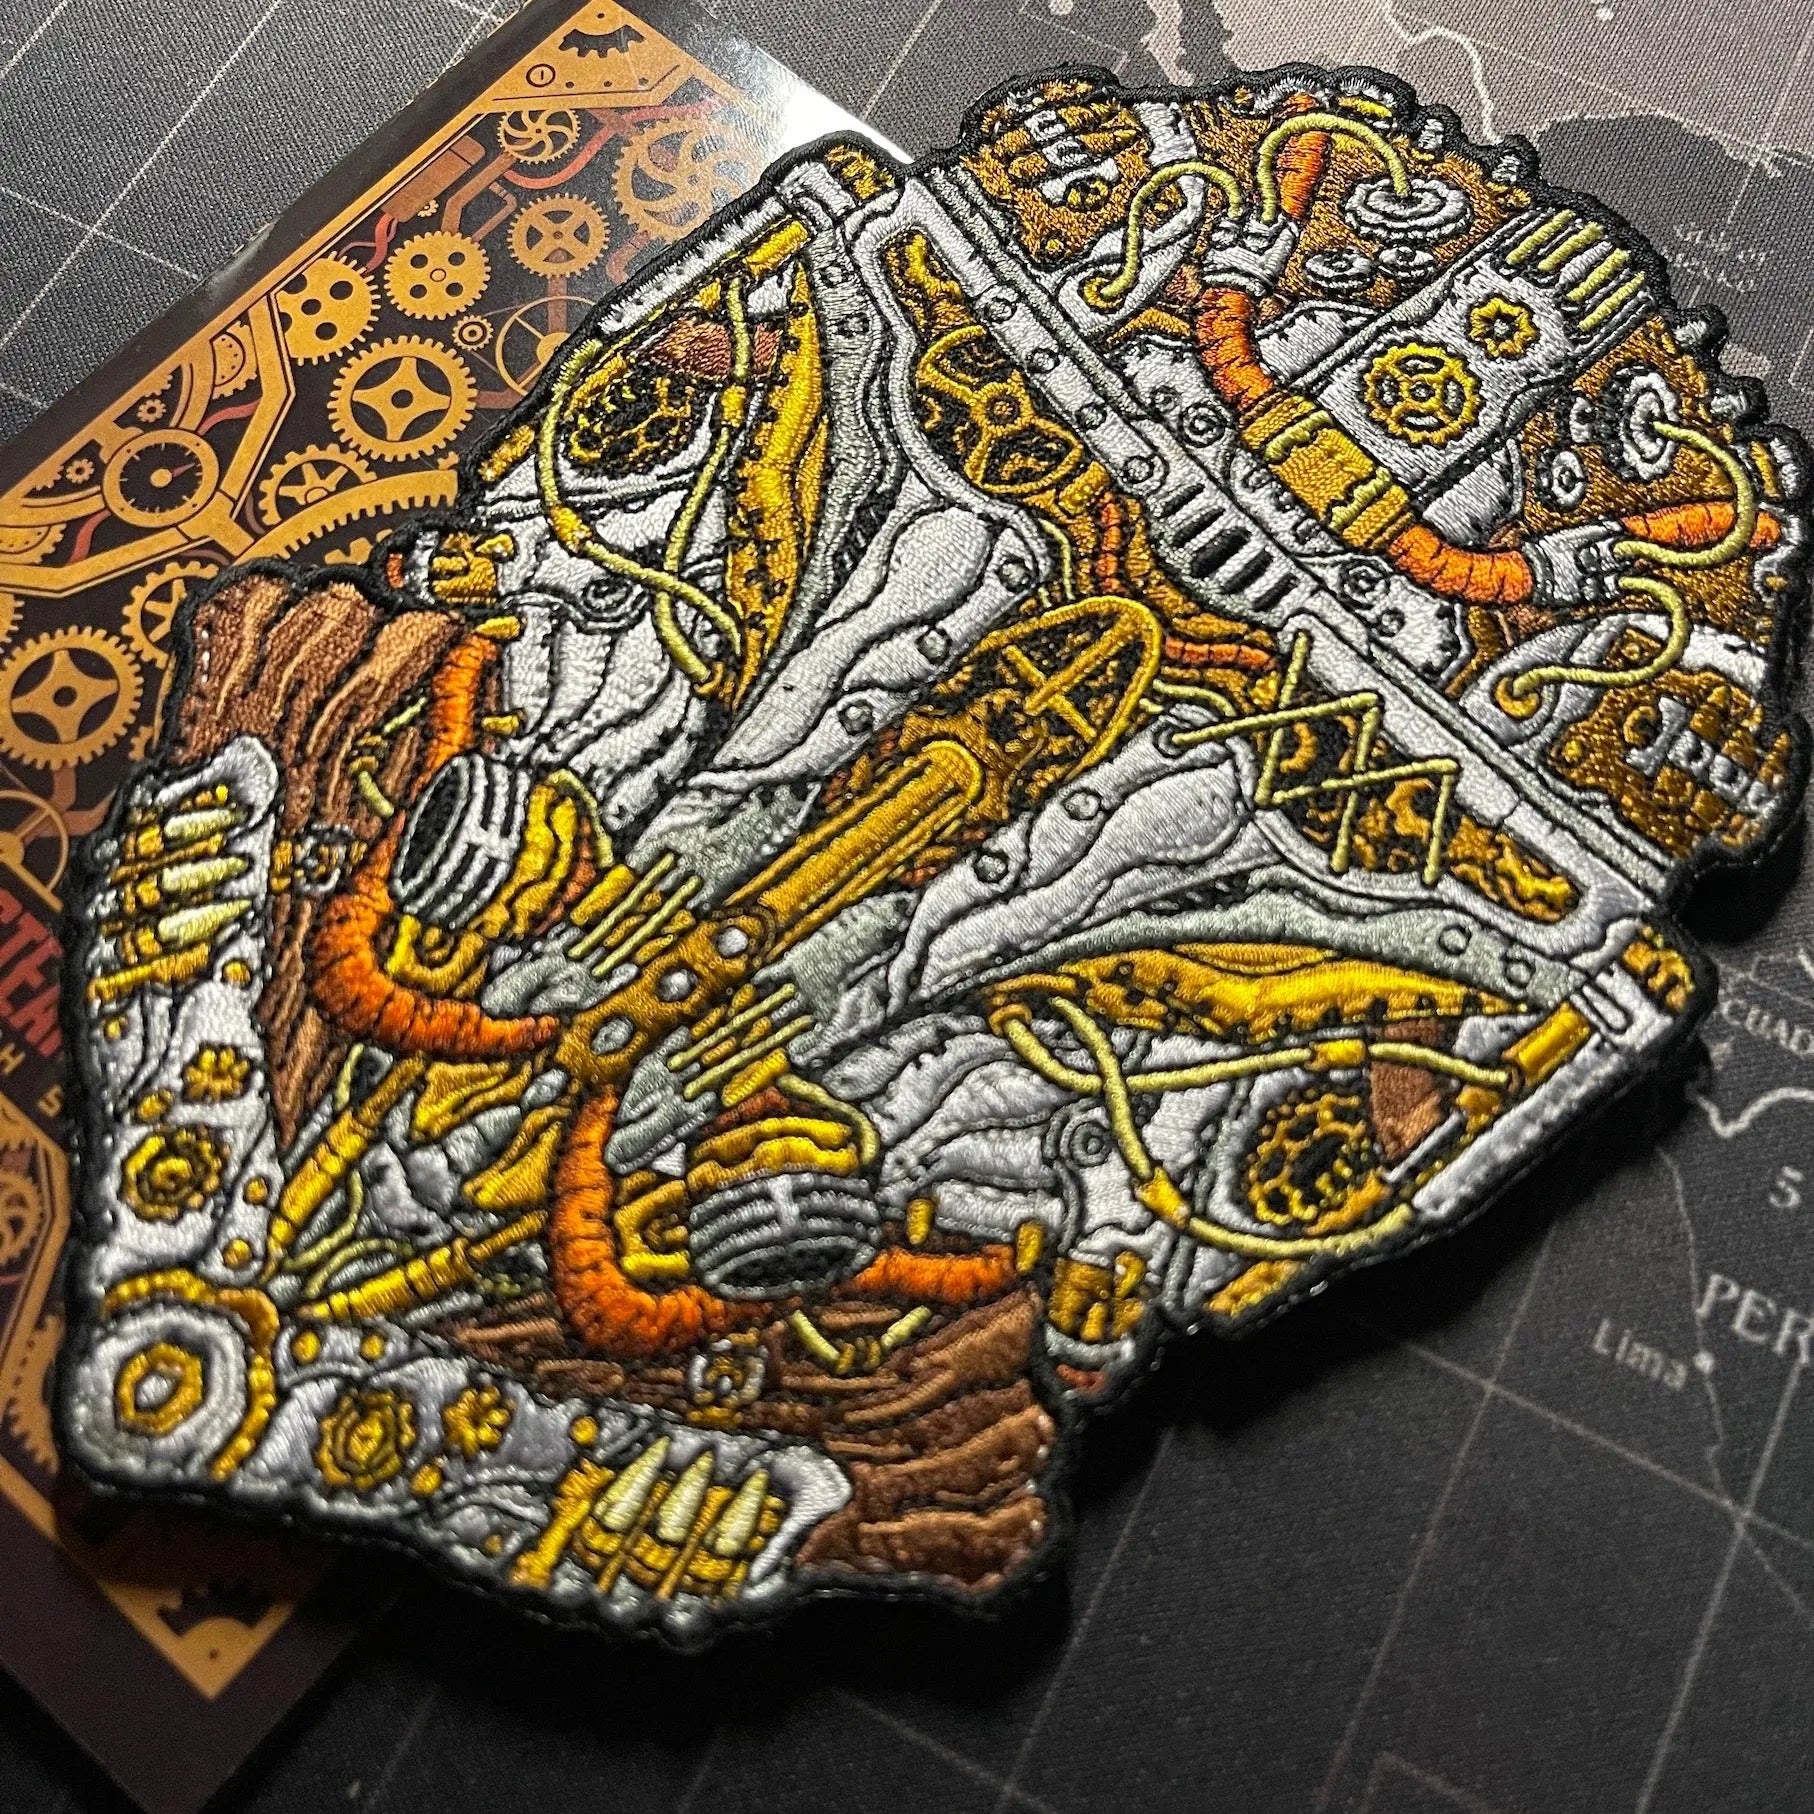 STEAMPUNK #2 PATCHLAB